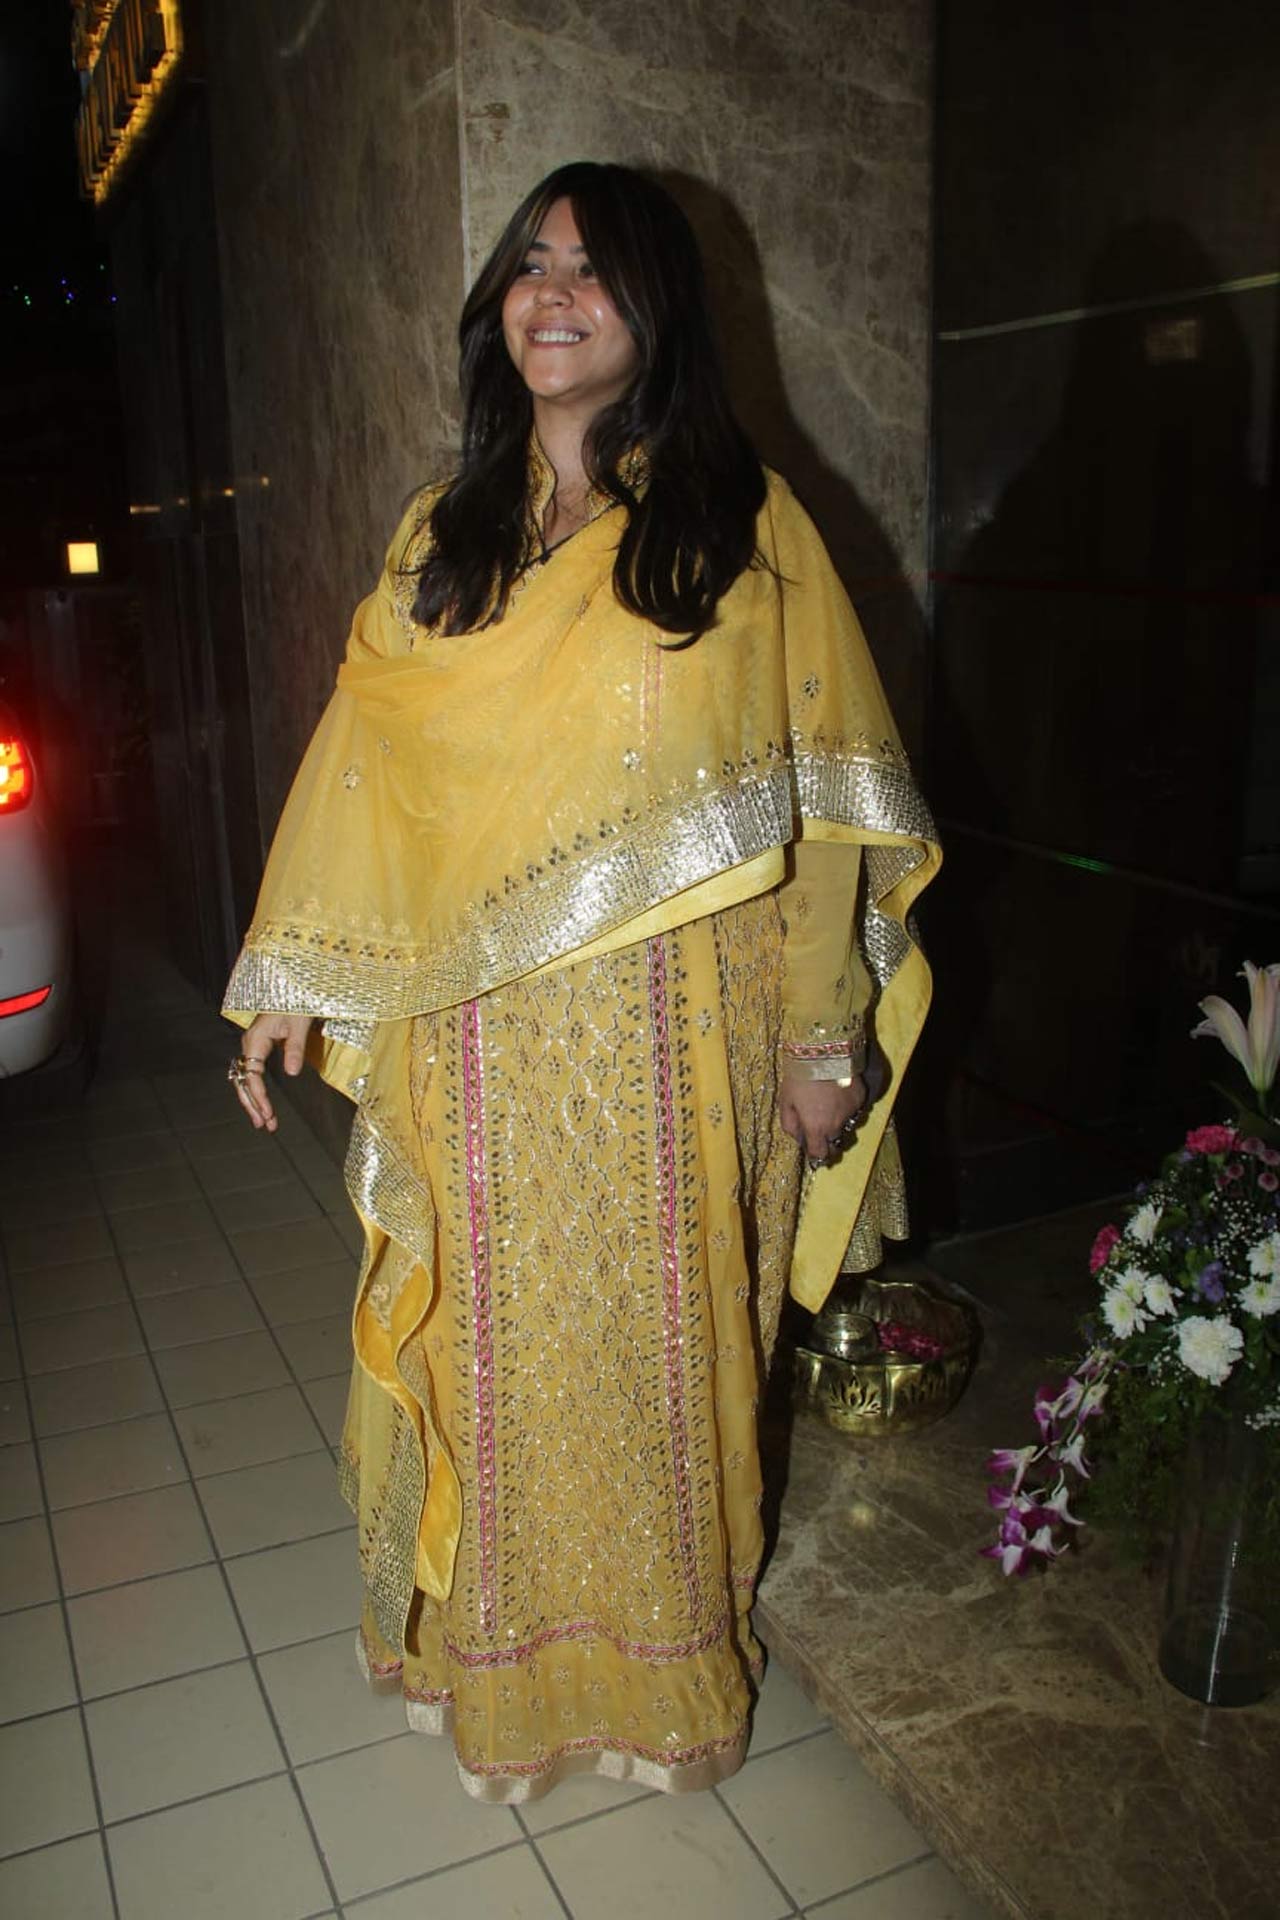 Ekta Kapoor was all smiles as she posed for paparazzi at Ramesh Taurani's Diwali bash. Her yellow ethnic outfit looked like the perfect choice for this Diwali party.